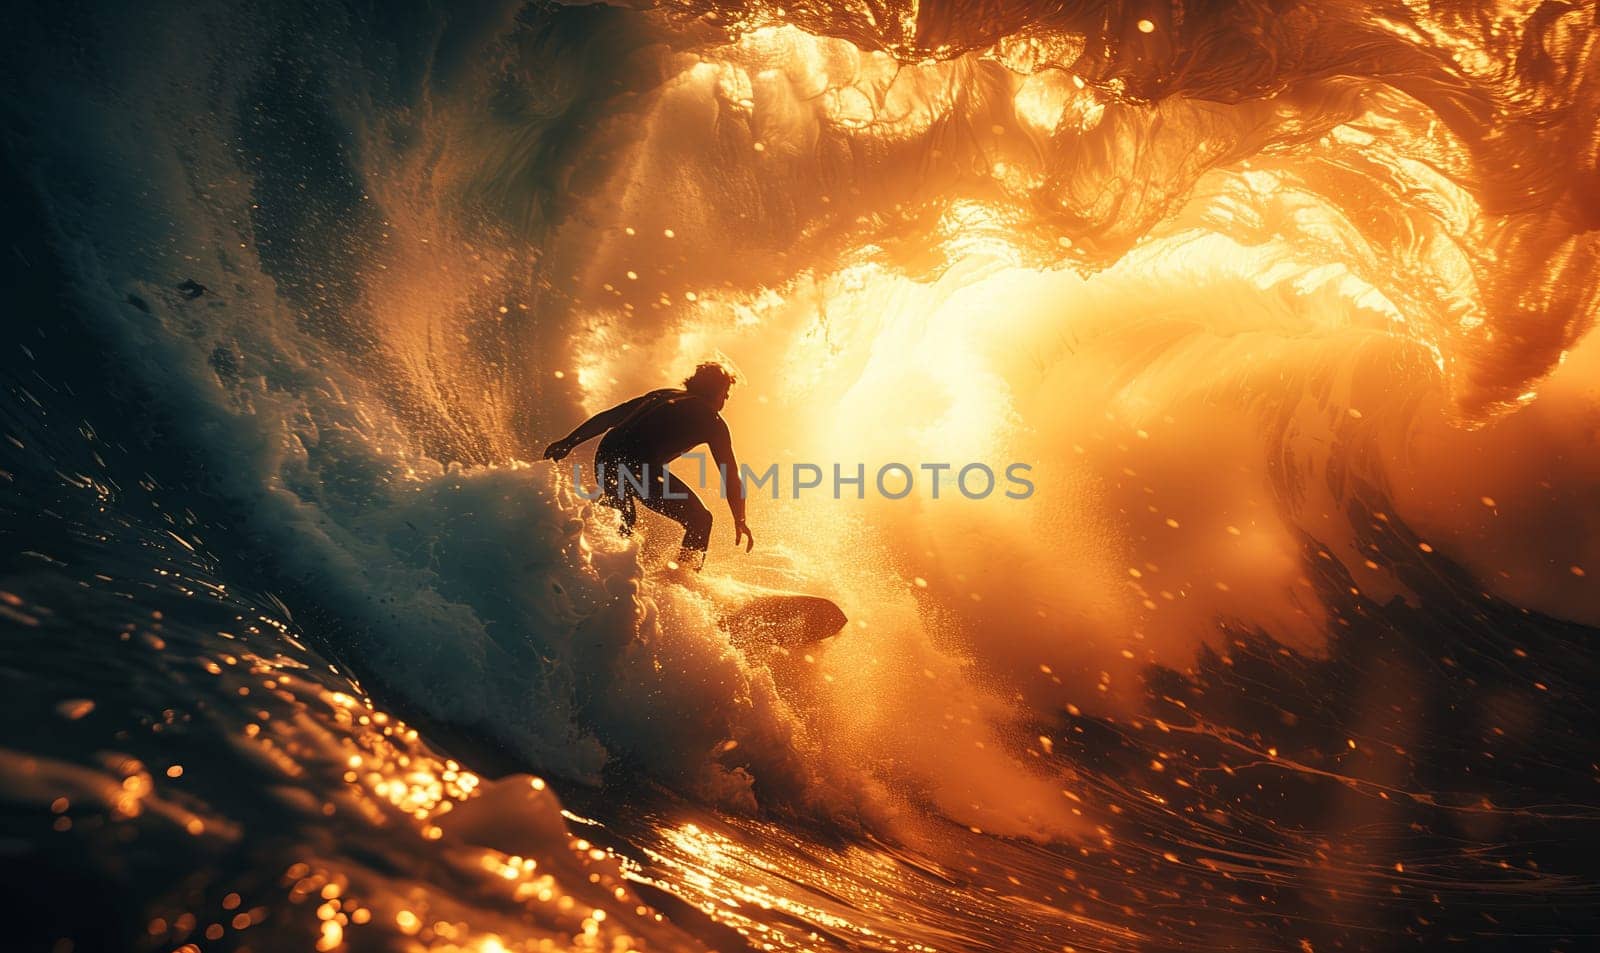 A man is artfully riding a wind wave on a surfboard in the water, under the heat of the sun and surrounded by the beautiful landscape of the ocean